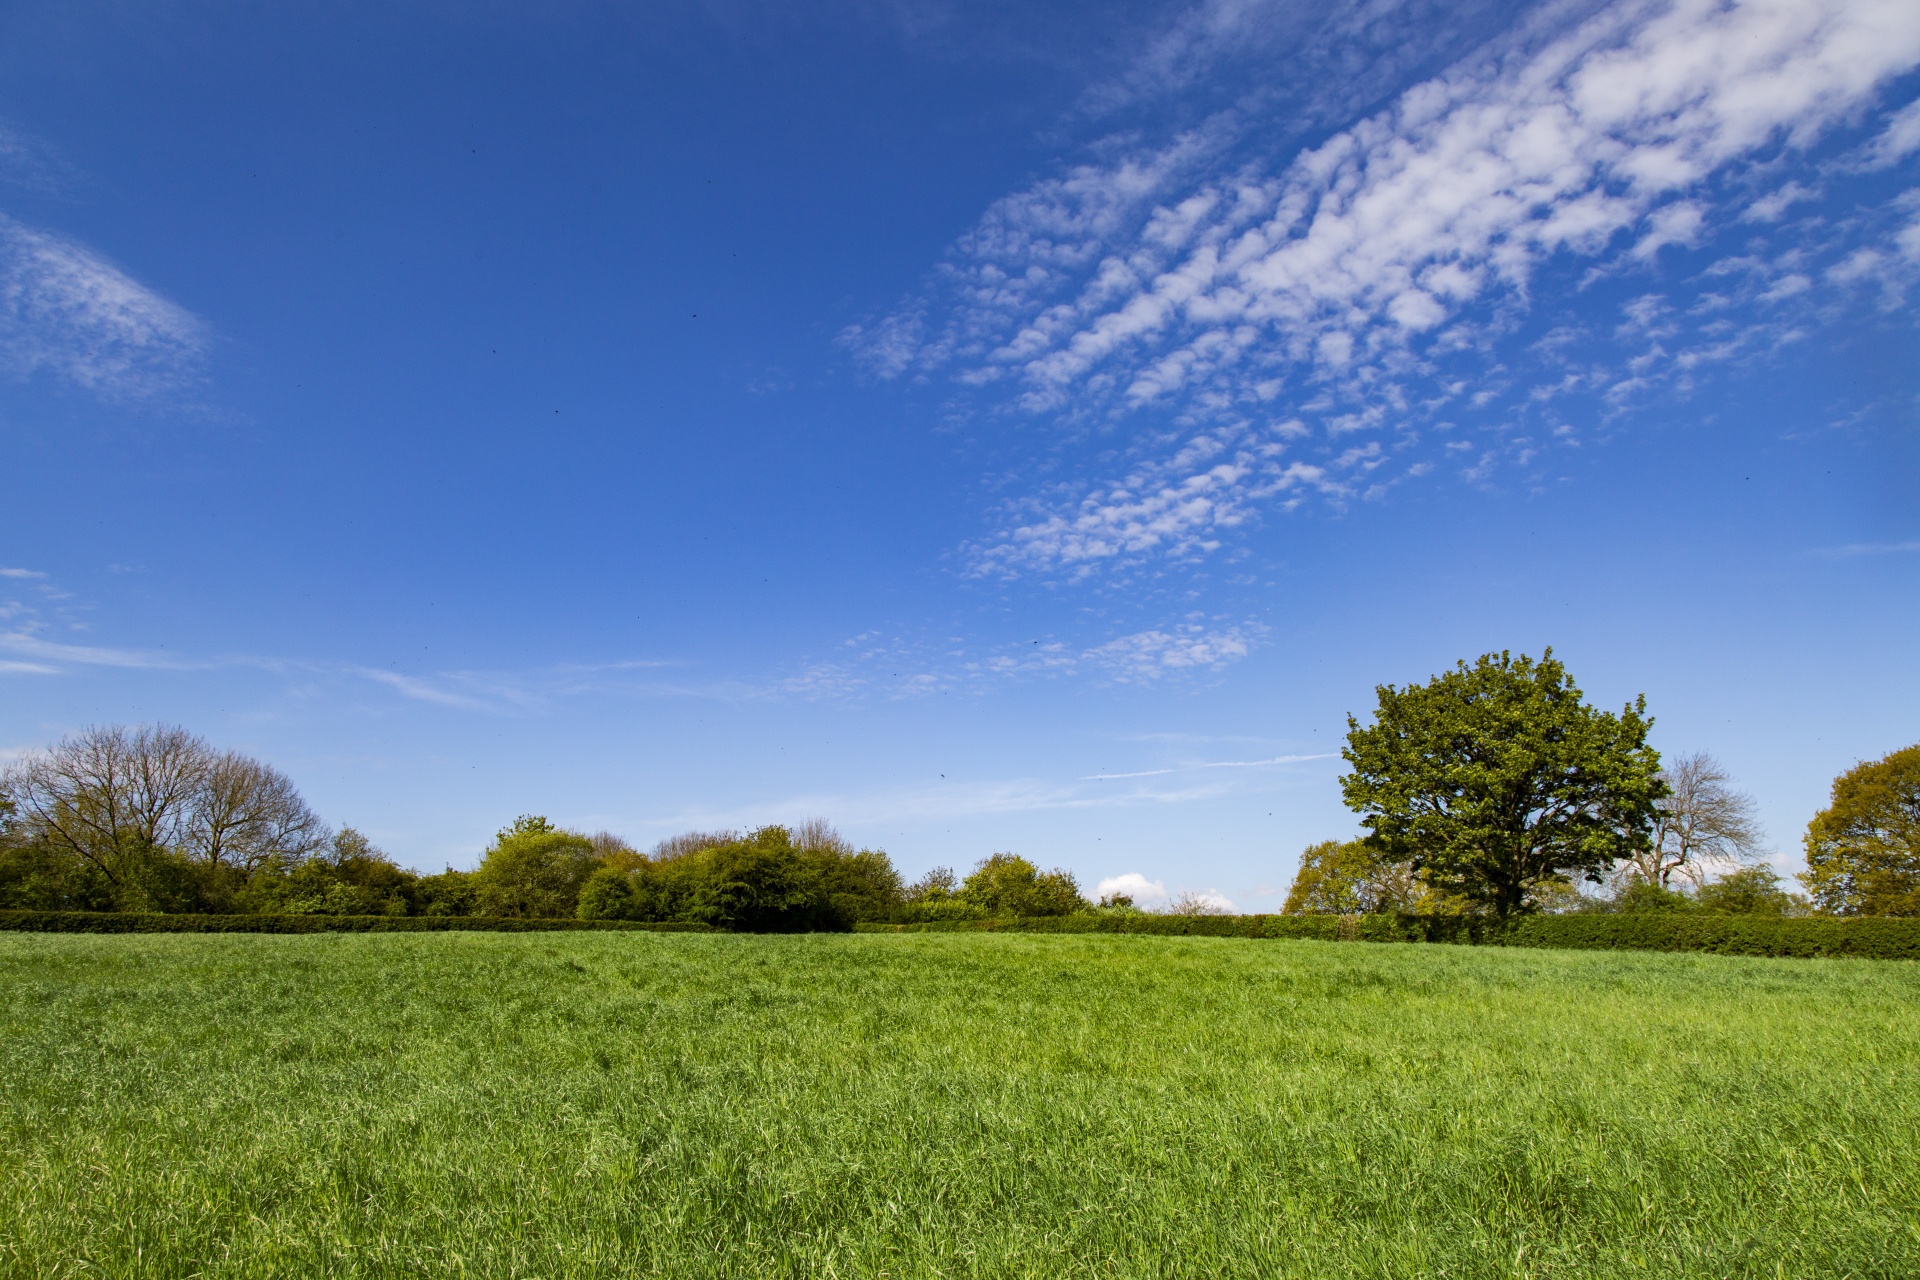 Summer Landscape, Grass, Tree and Blue Sky